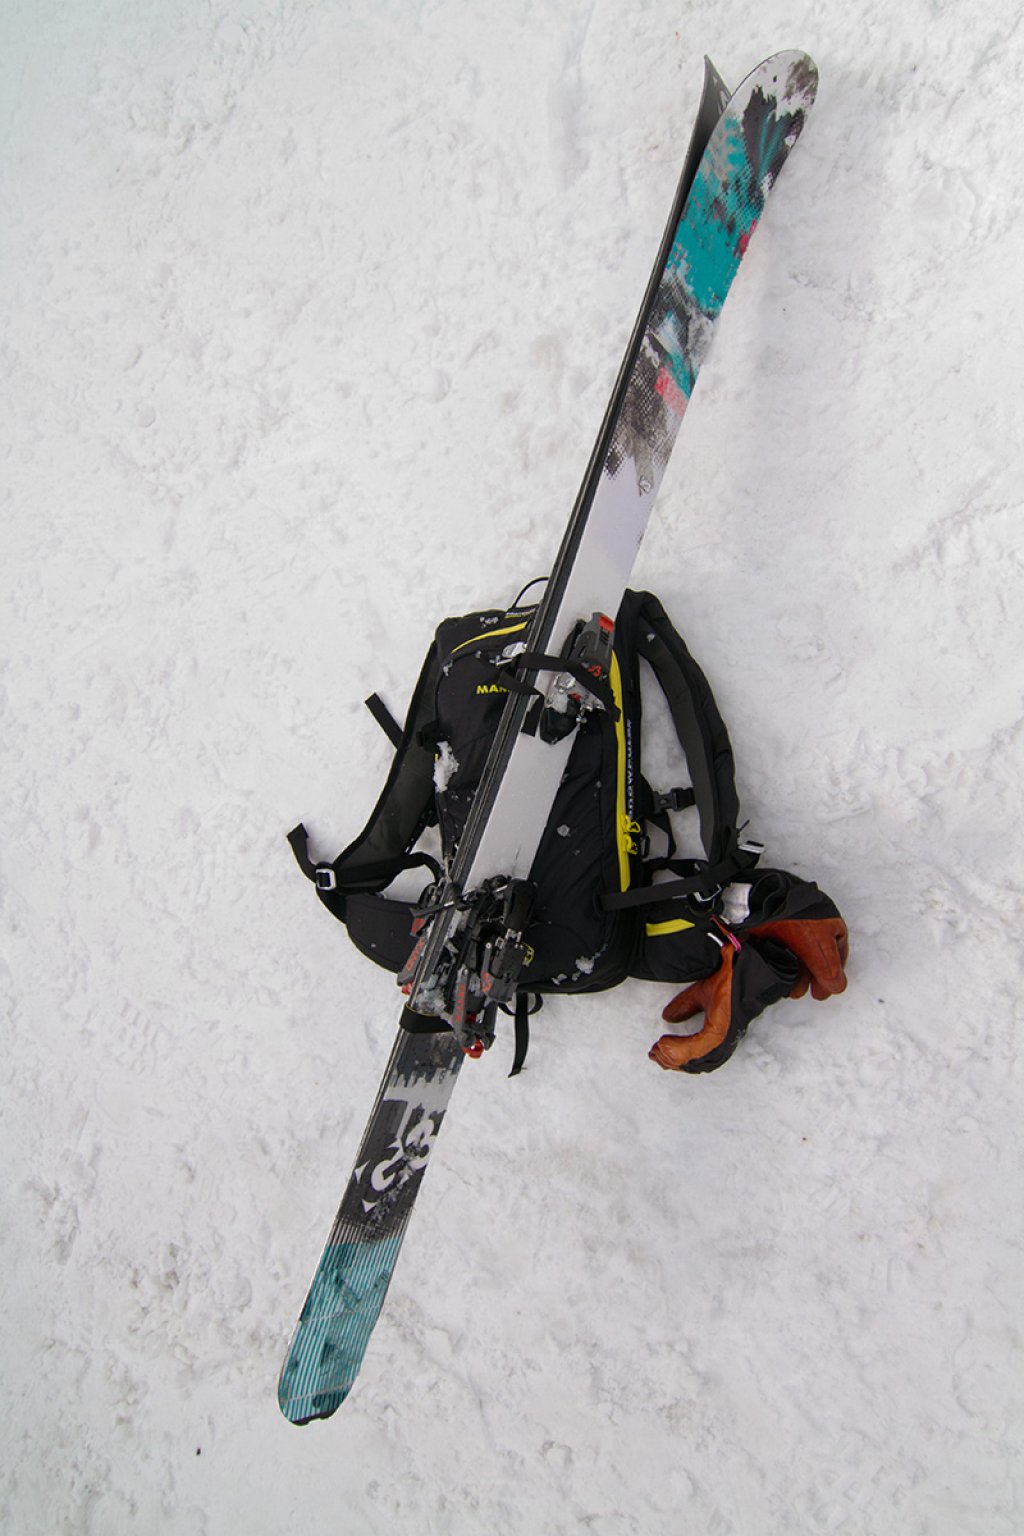 The diagonal ski attachment works excellently and can be elegantly stowed away in the backpack.